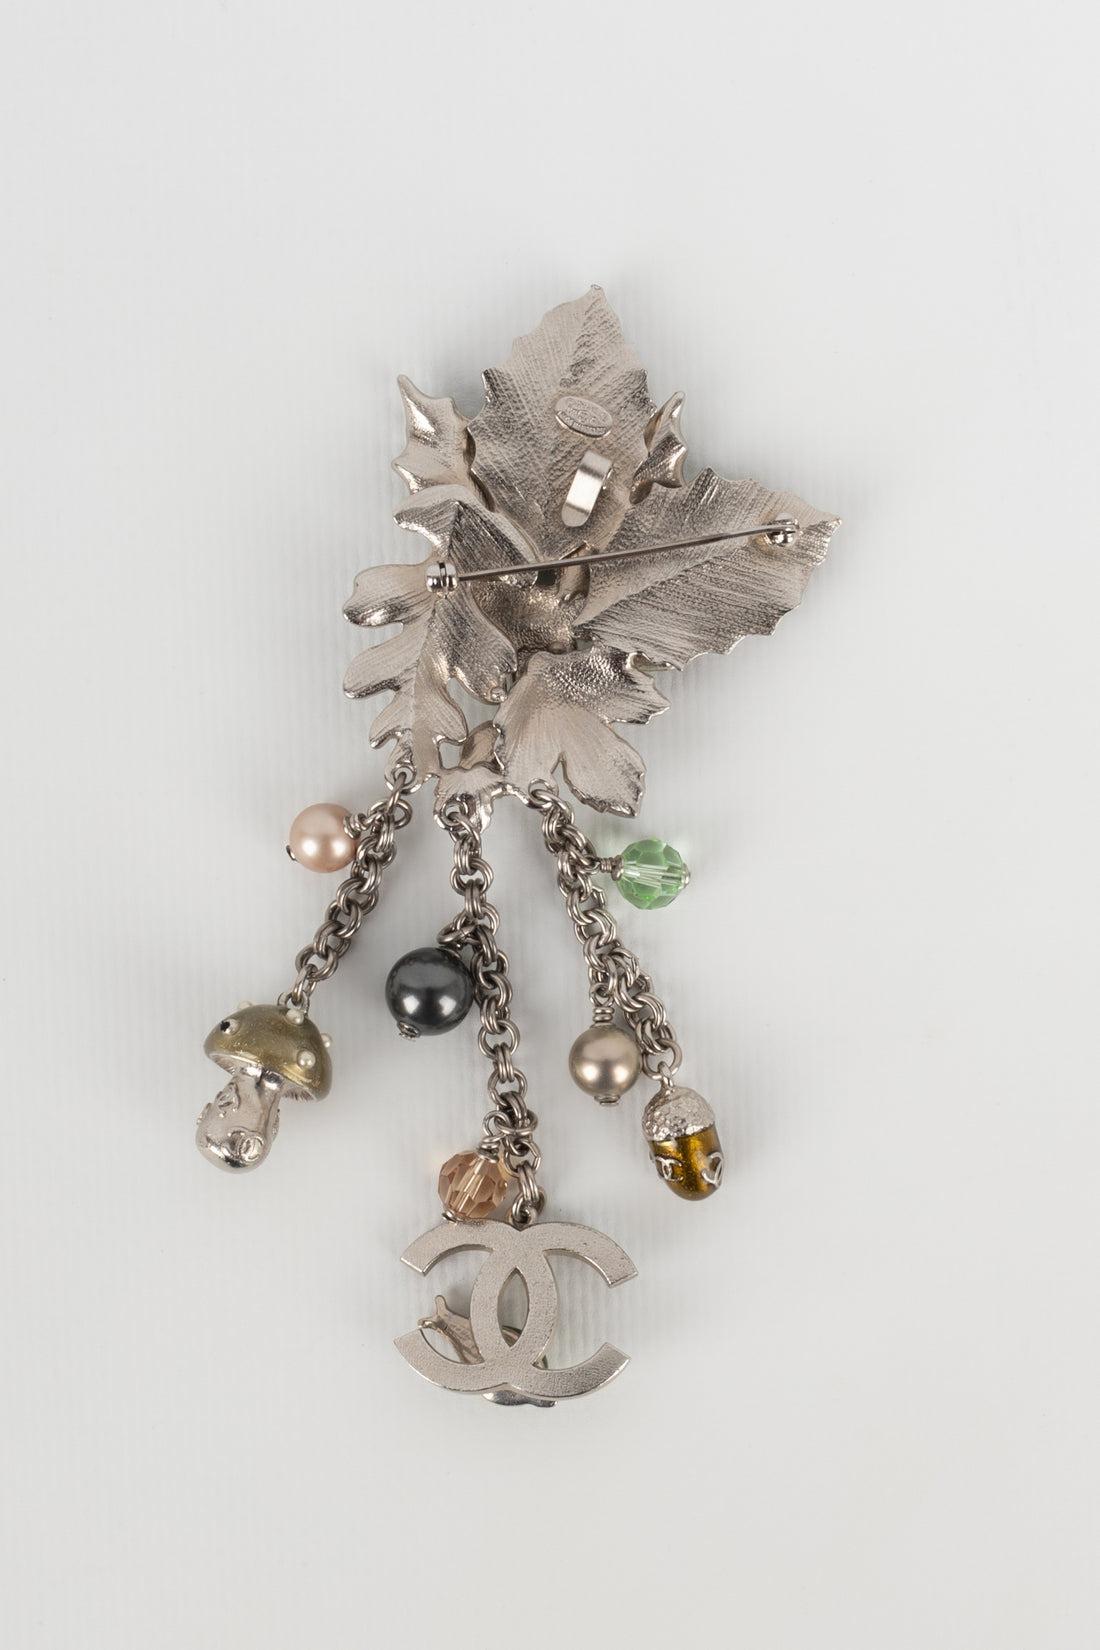 Chanel - (Made in France) Silvery metal pendant brooch with enamel, rhinestones, pearls, and charms. Fall-Winter 2005 Collection.

Additional information:
Condition: Very good condition
Dimensions: Height: 13 cm
Period: 21st Century

Seller